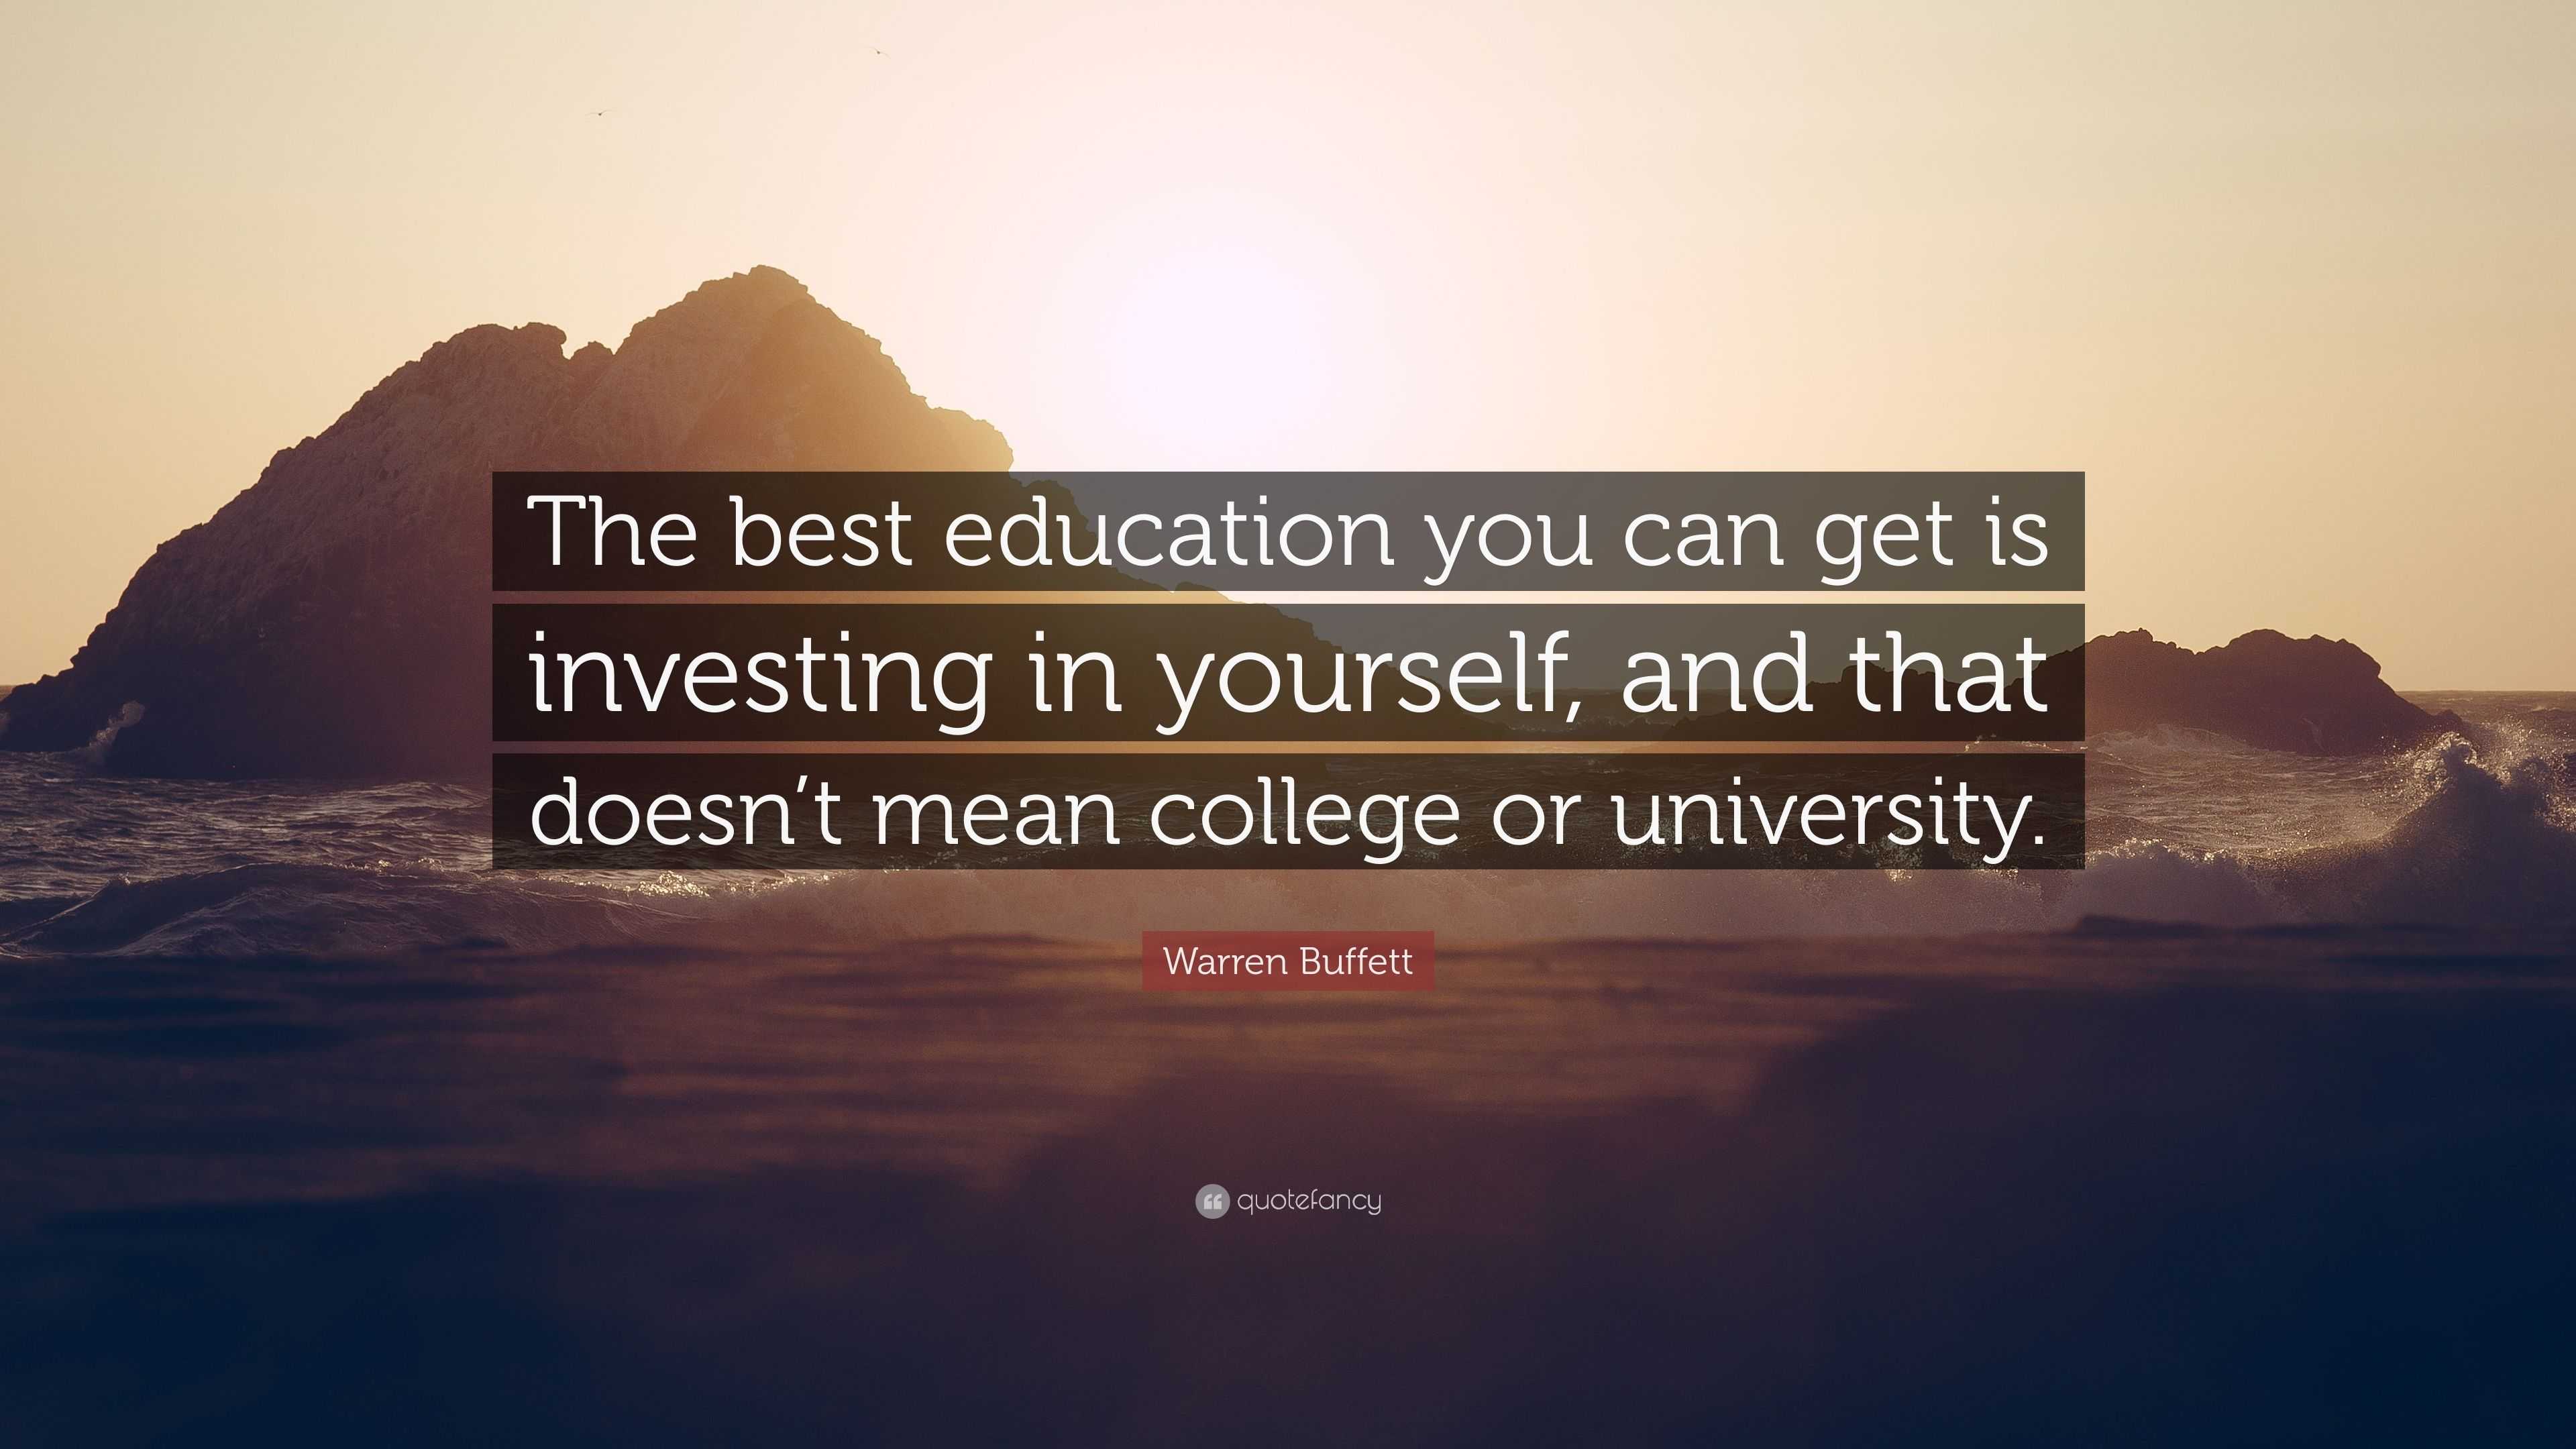 Investing in yourself education acorns investing spare change lyrics